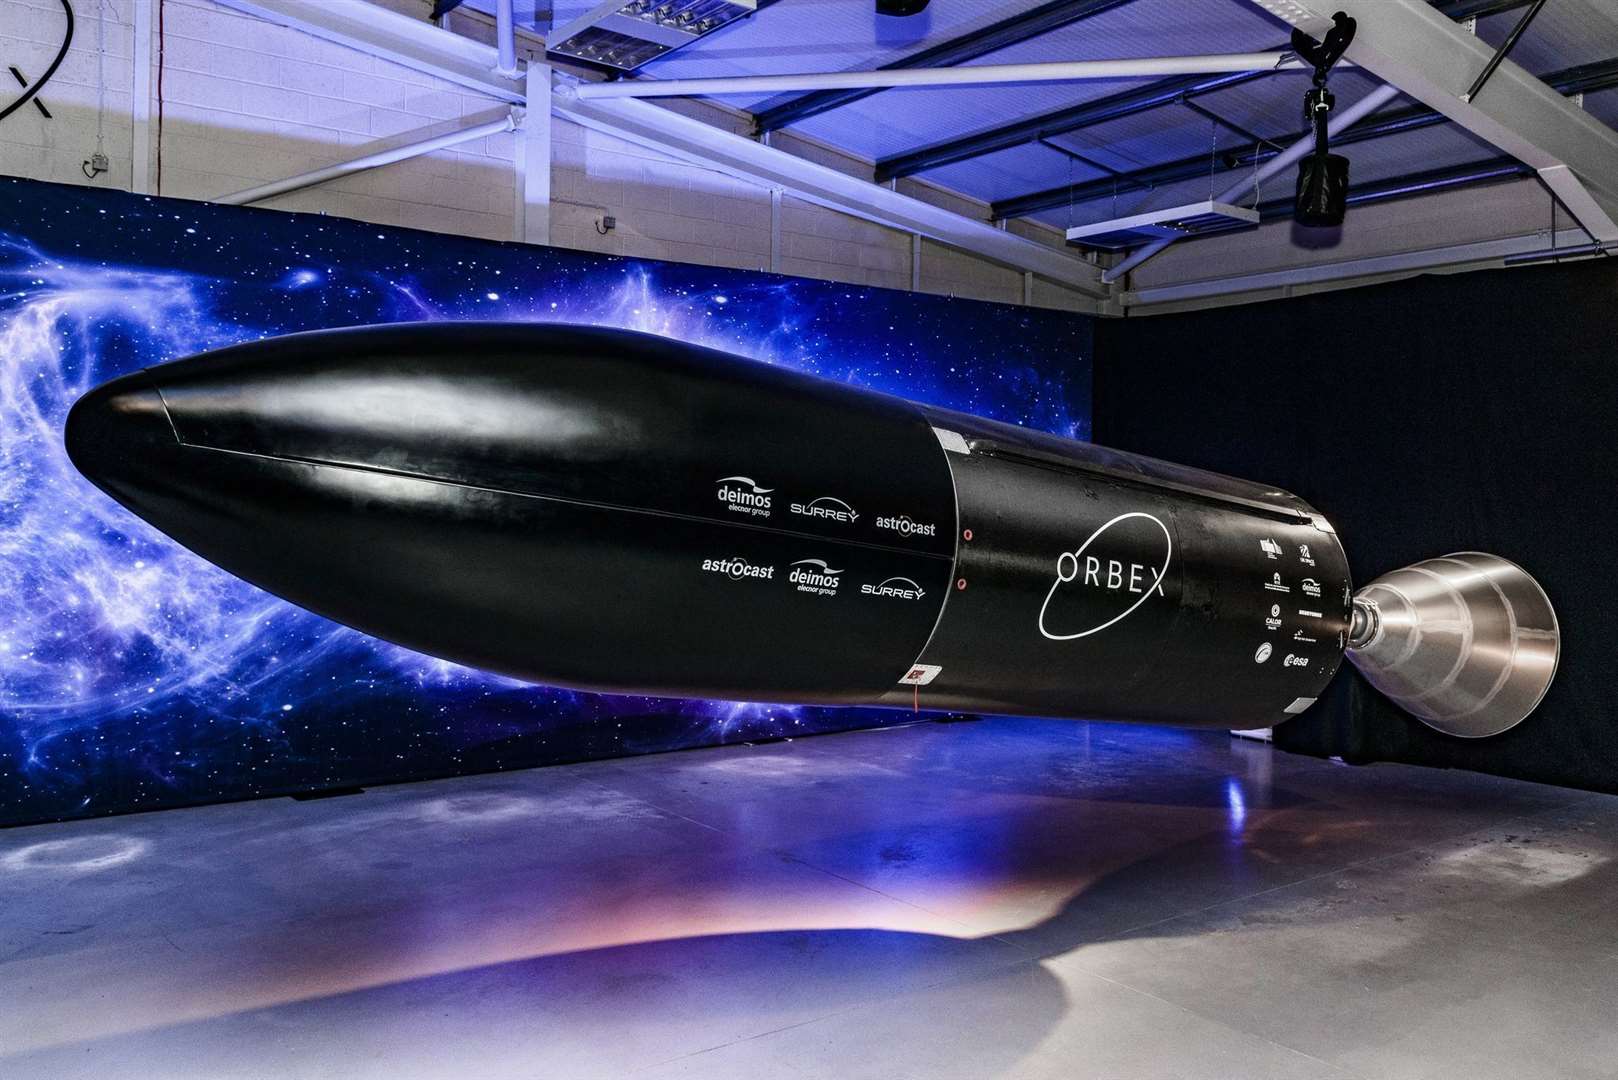 Prime rocket will launch in late 2022.